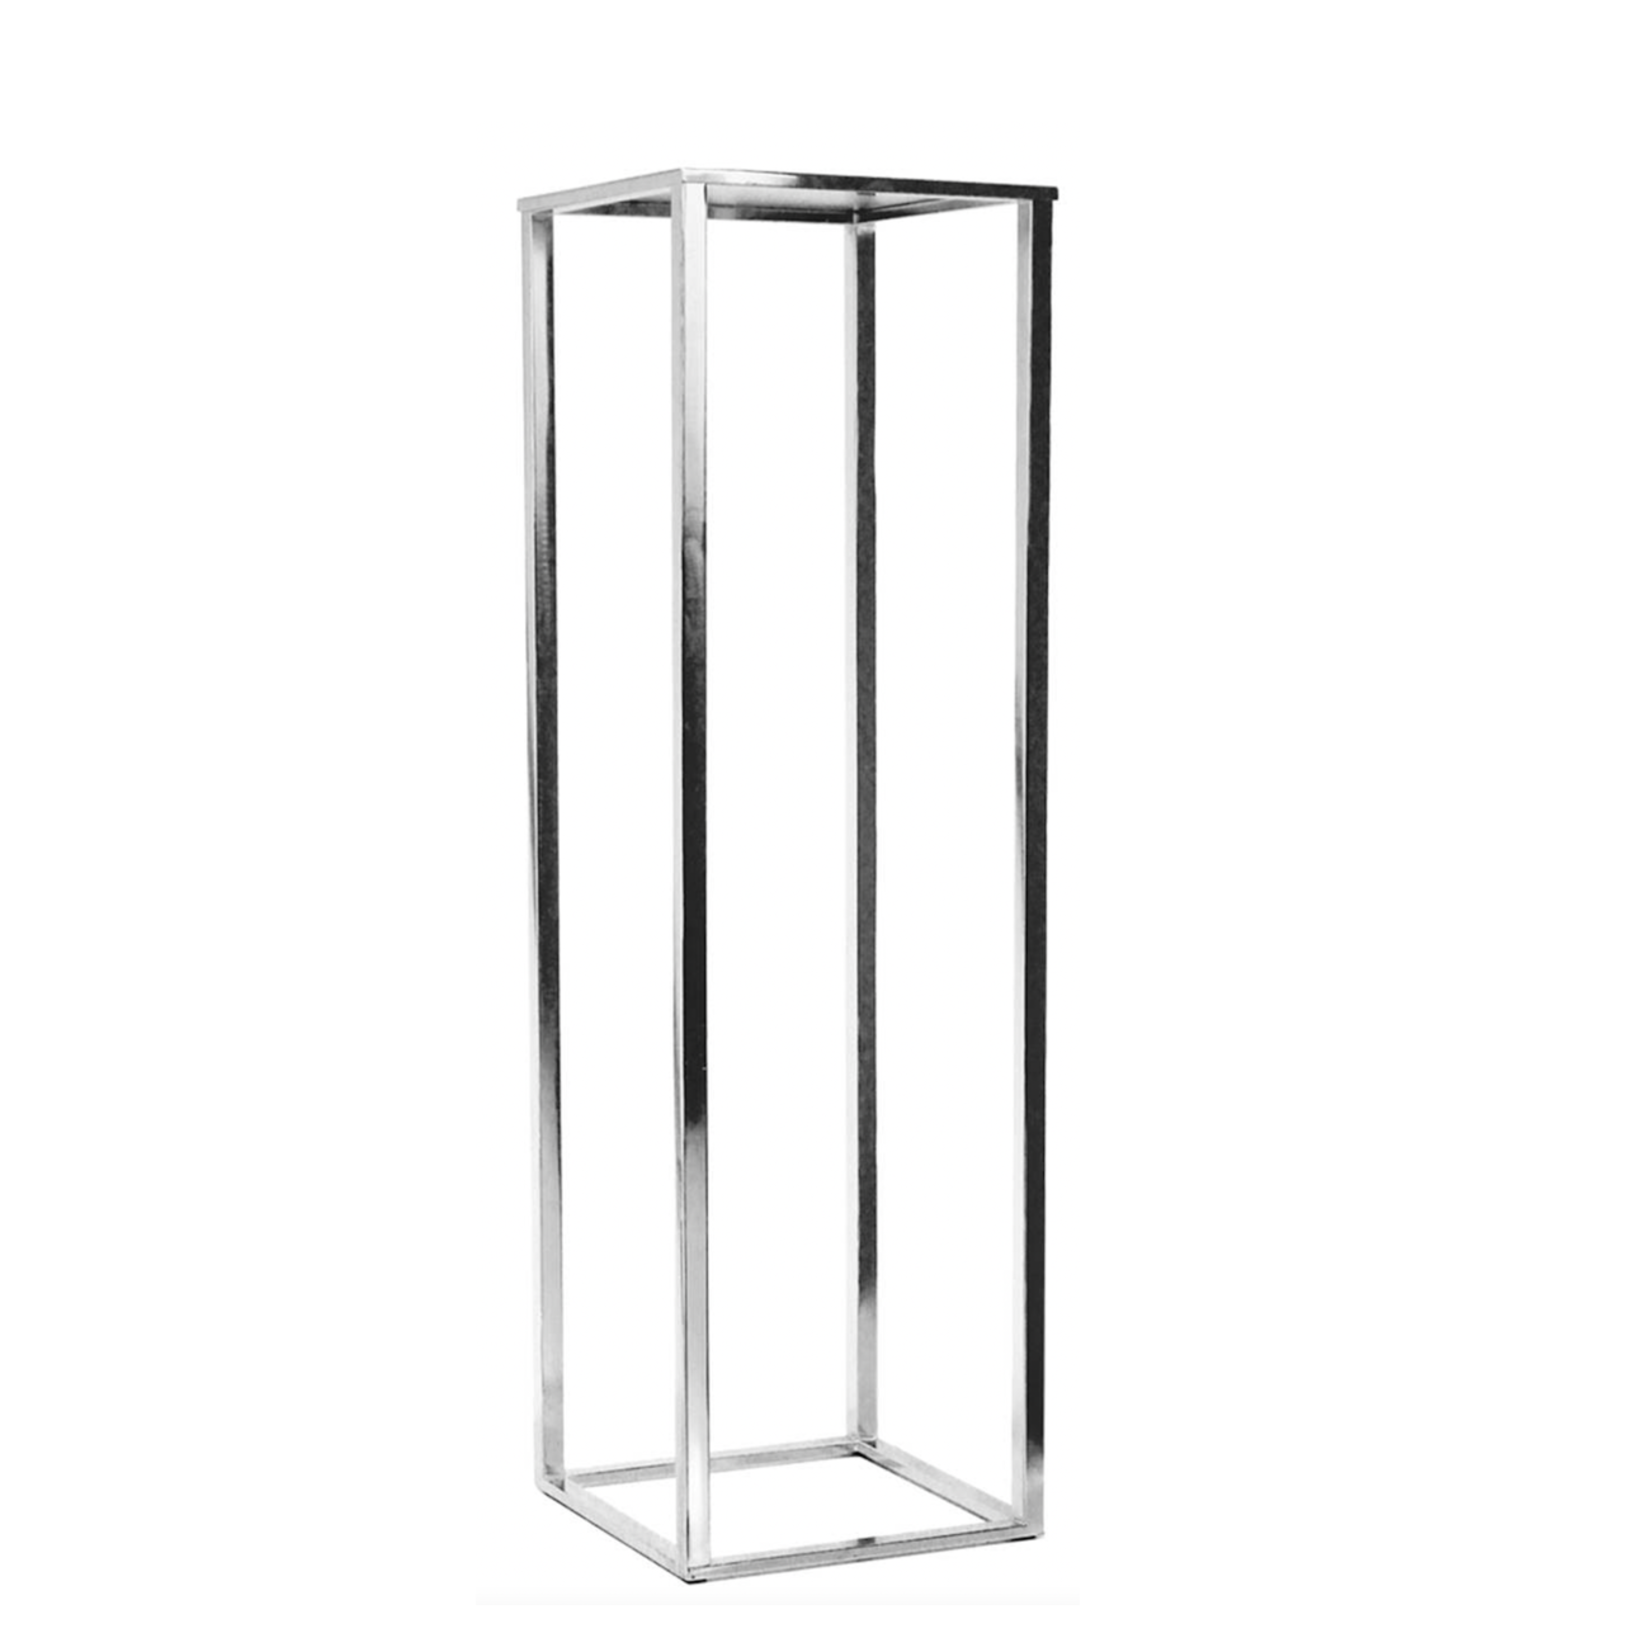 Small: H- 32” D- 10” x 10” POWDER SILVER COATING METAL STAND  REMOVABLE TOP